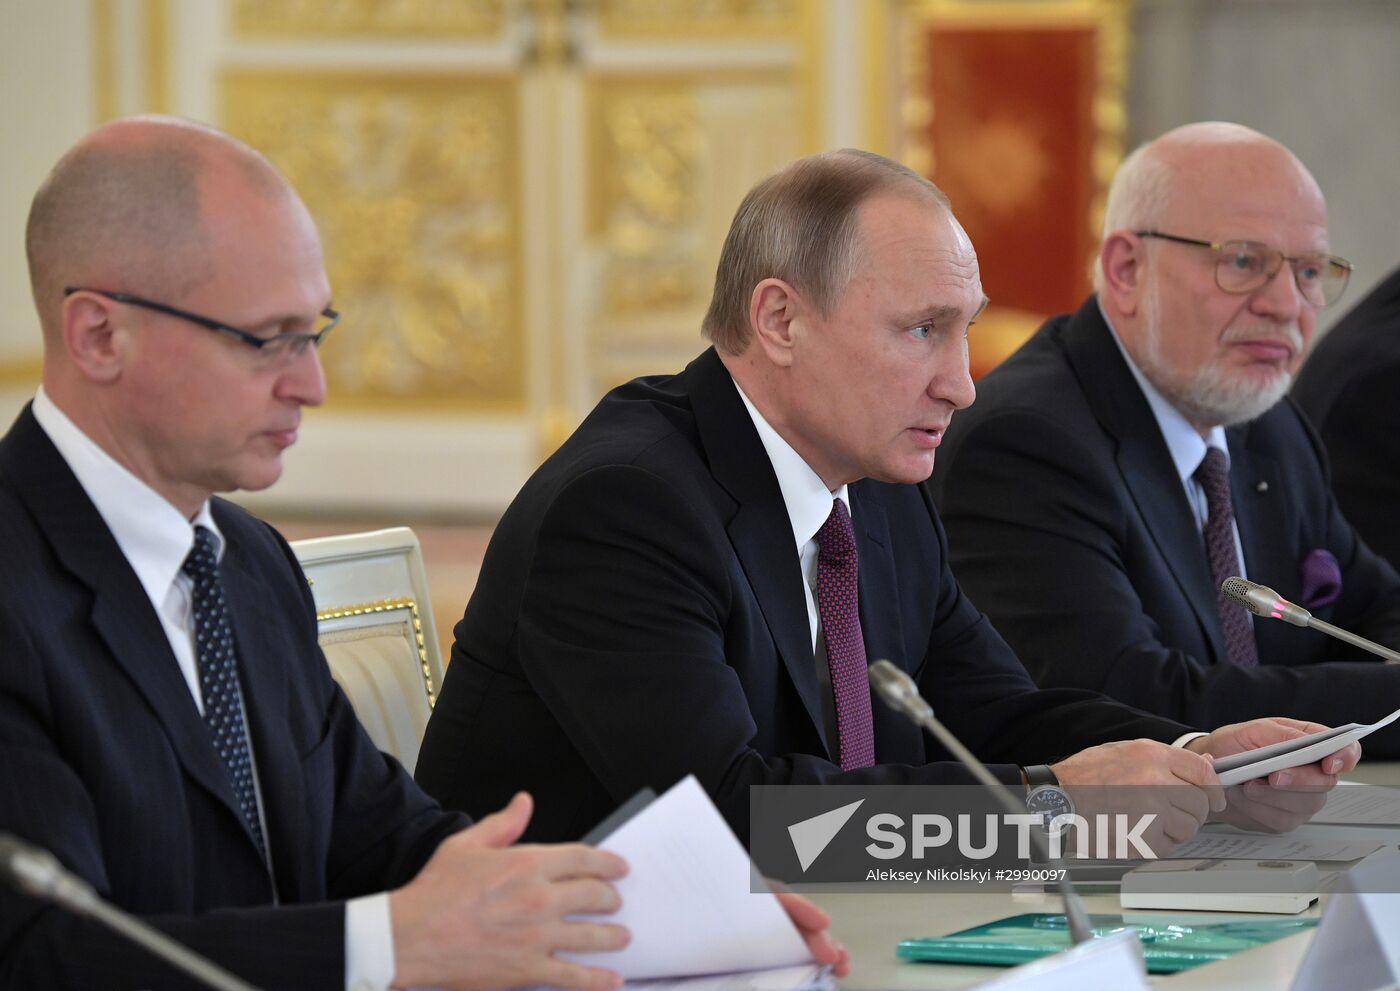 Russian President Vladimir Putin holds Council for Civil Society and Human Rights meeting